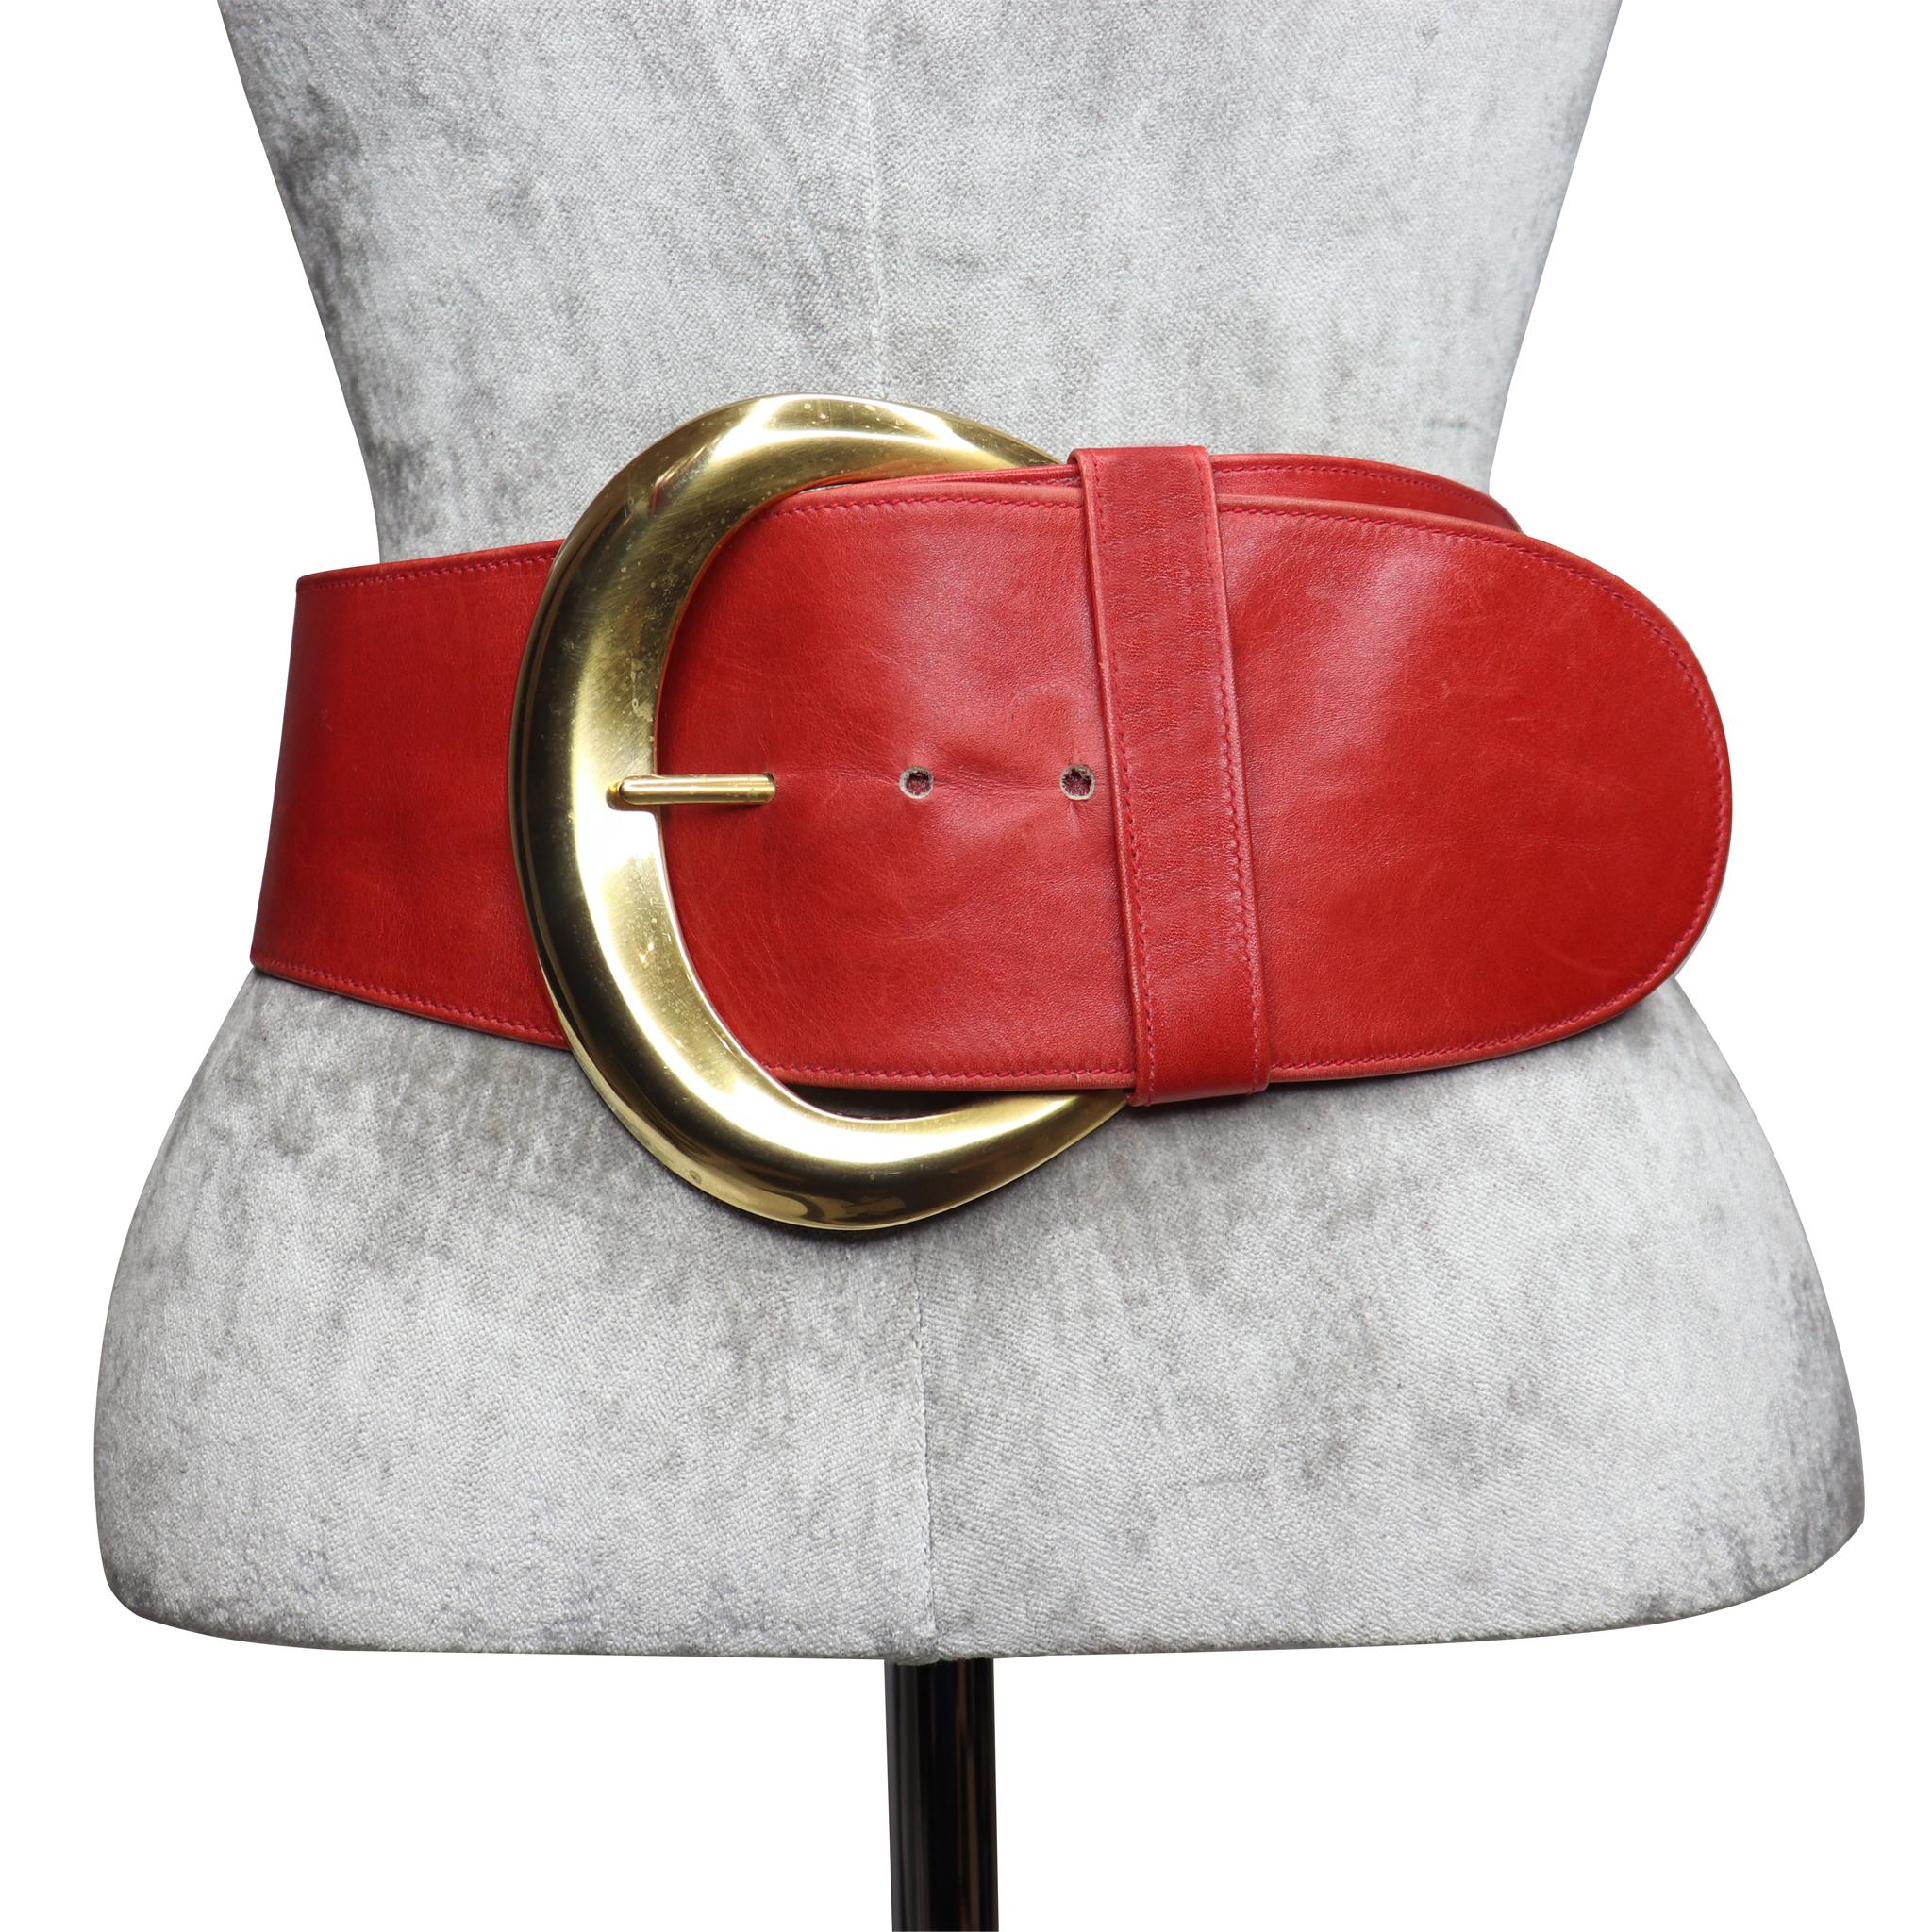 Donna Karan Red Leather w/ Goldtone Buckle Circa 1990s. In excellent condition 

Measurements-

Longest length: 27.5 Inches
Shortest length: 25.5 Inches 